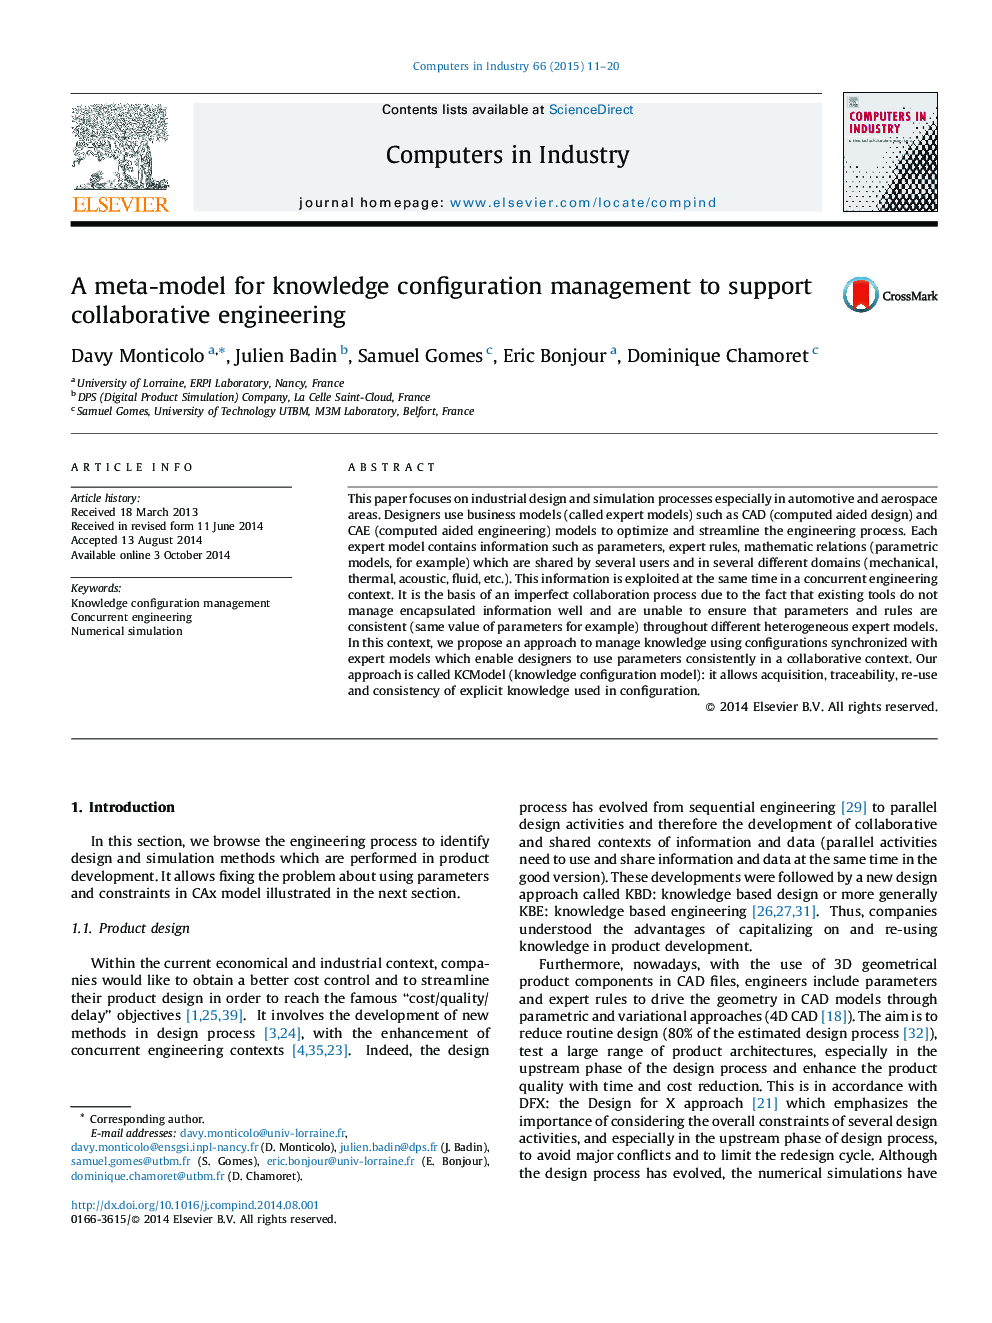 A meta-model for knowledge configuration management to support collaborative engineering